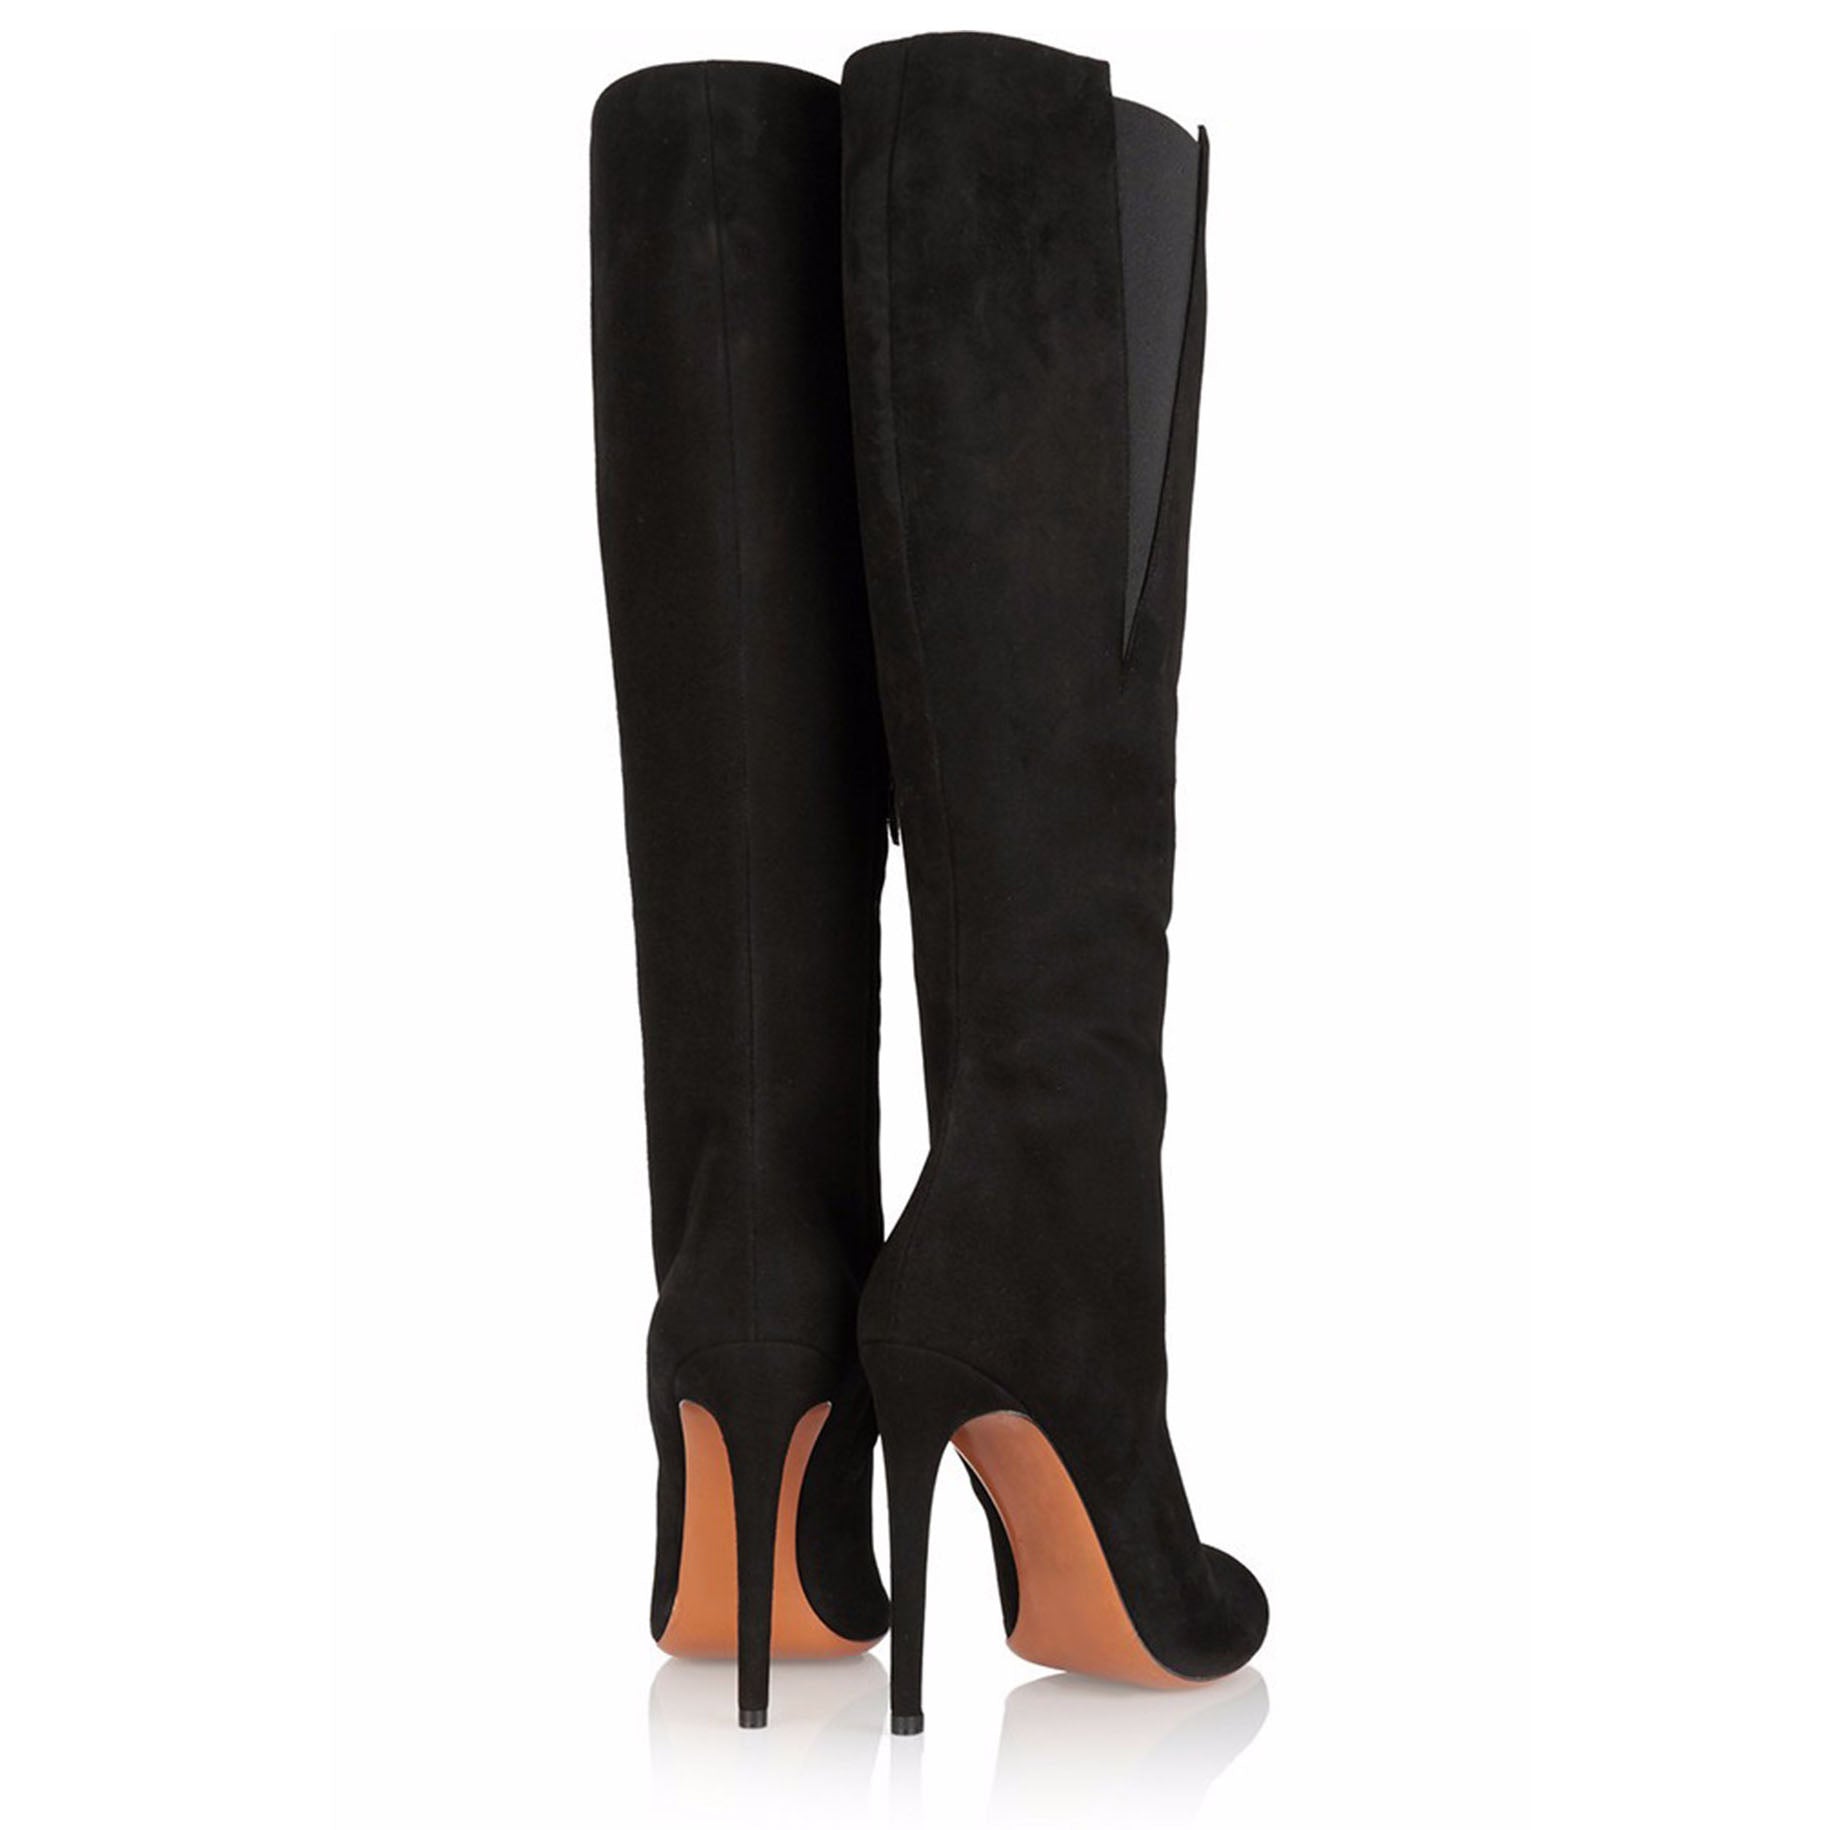 Patchwork Round Toe Stiletto High Heel Knee Length Long Boots